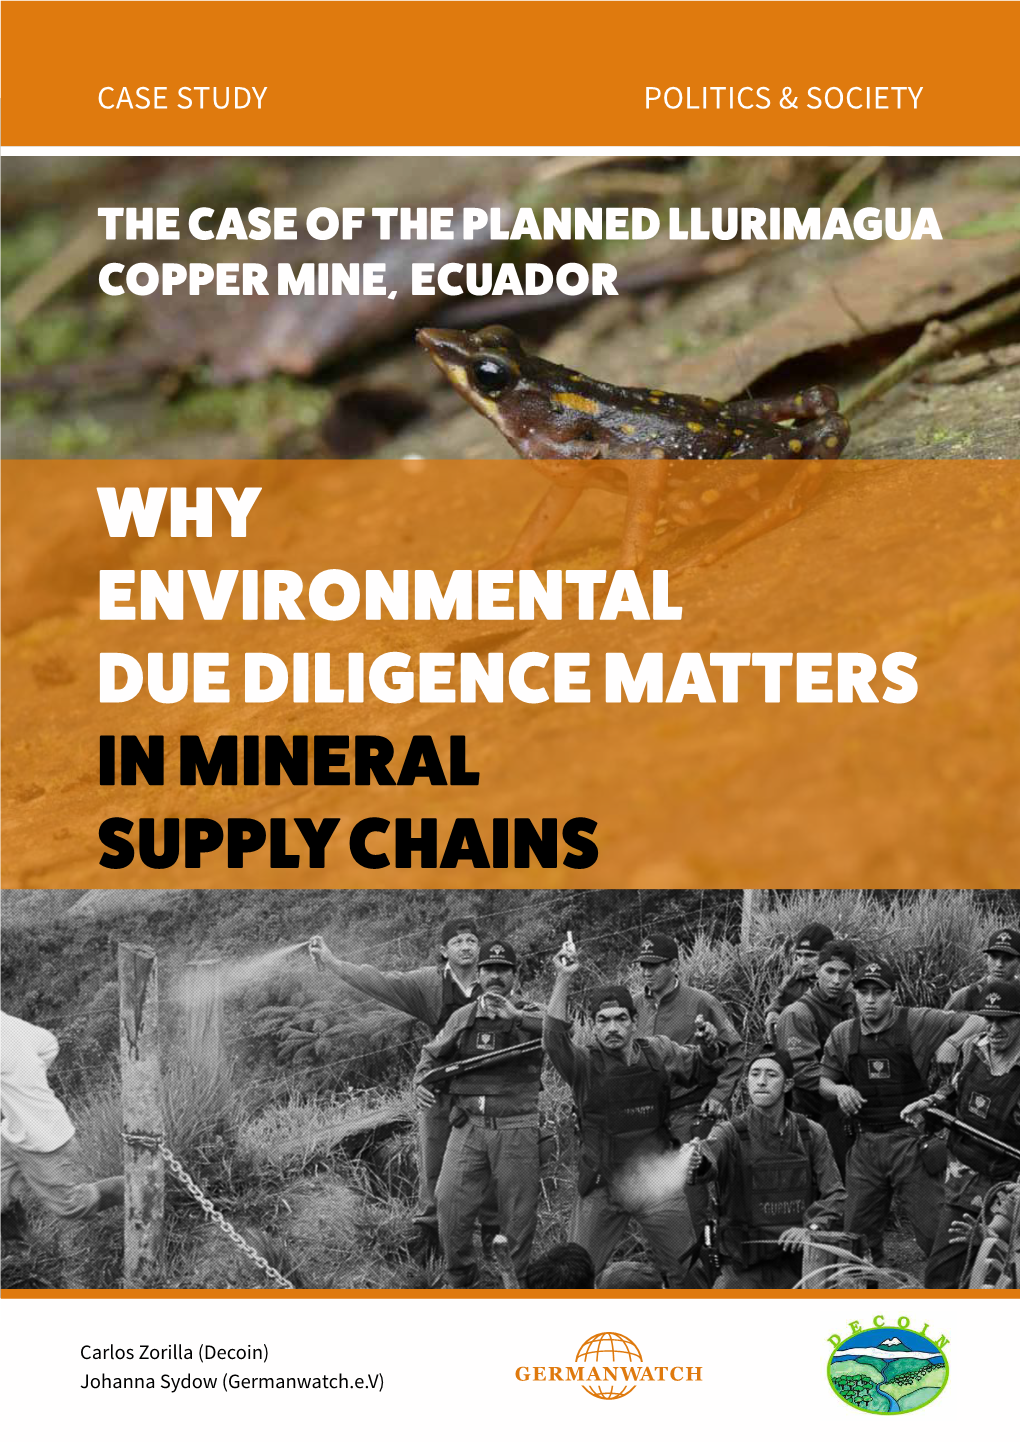 Why Environmental Due Diligence Matters in Mineral Supply Chains